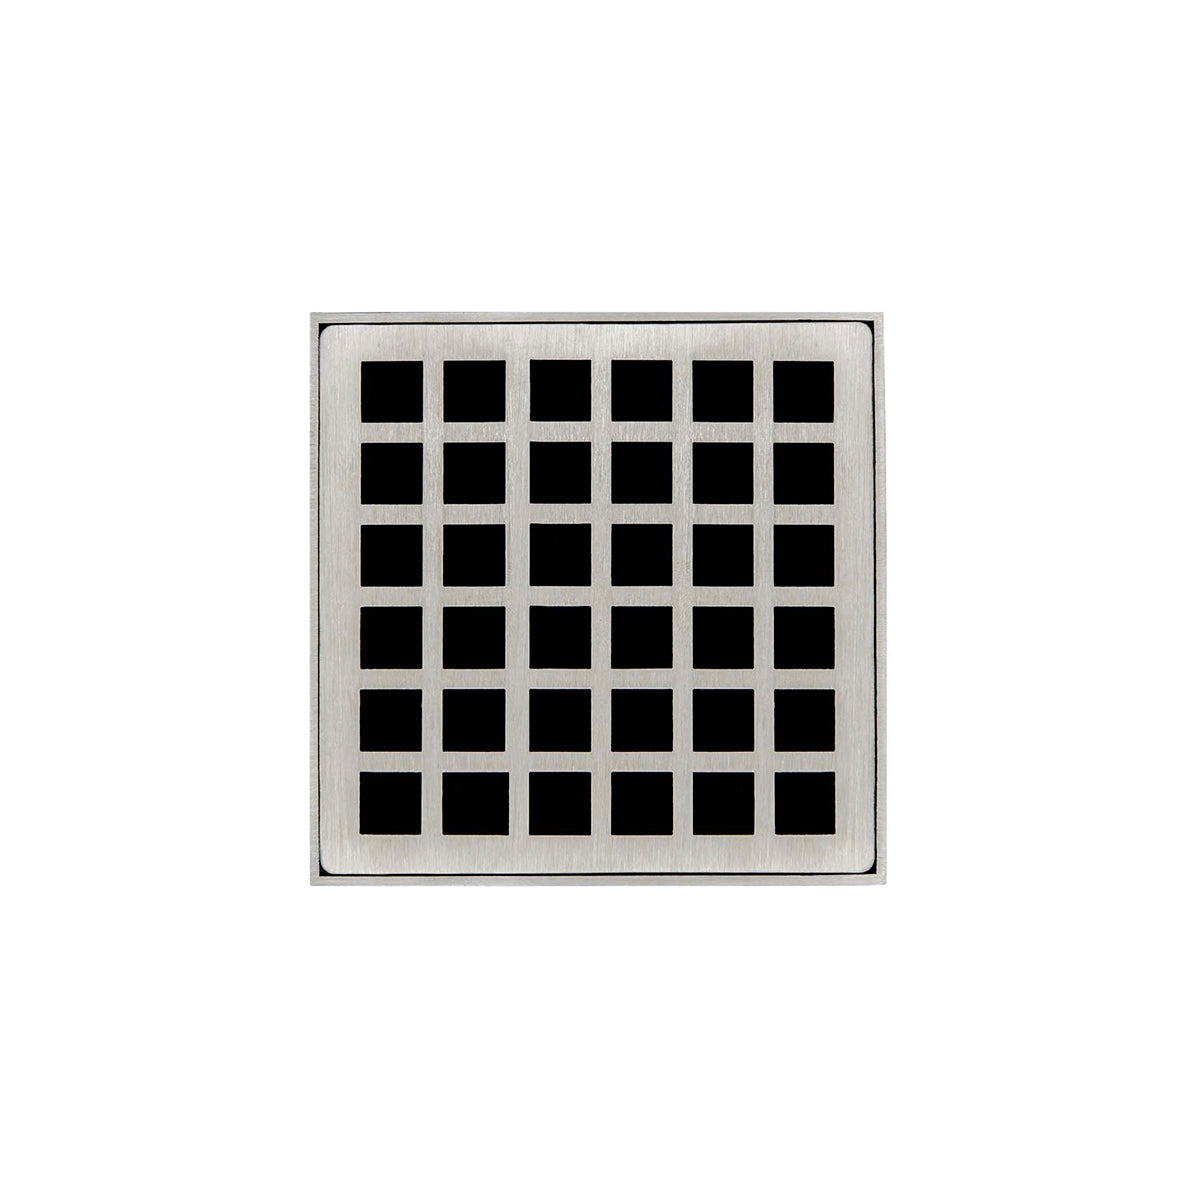 Infinity Drain 4" x 4" QD 4 Premium Center Drain Kit with Squares Pattern Decorative Plate with Cast Iron Drain Body for Hot Mop, 2" Outlet